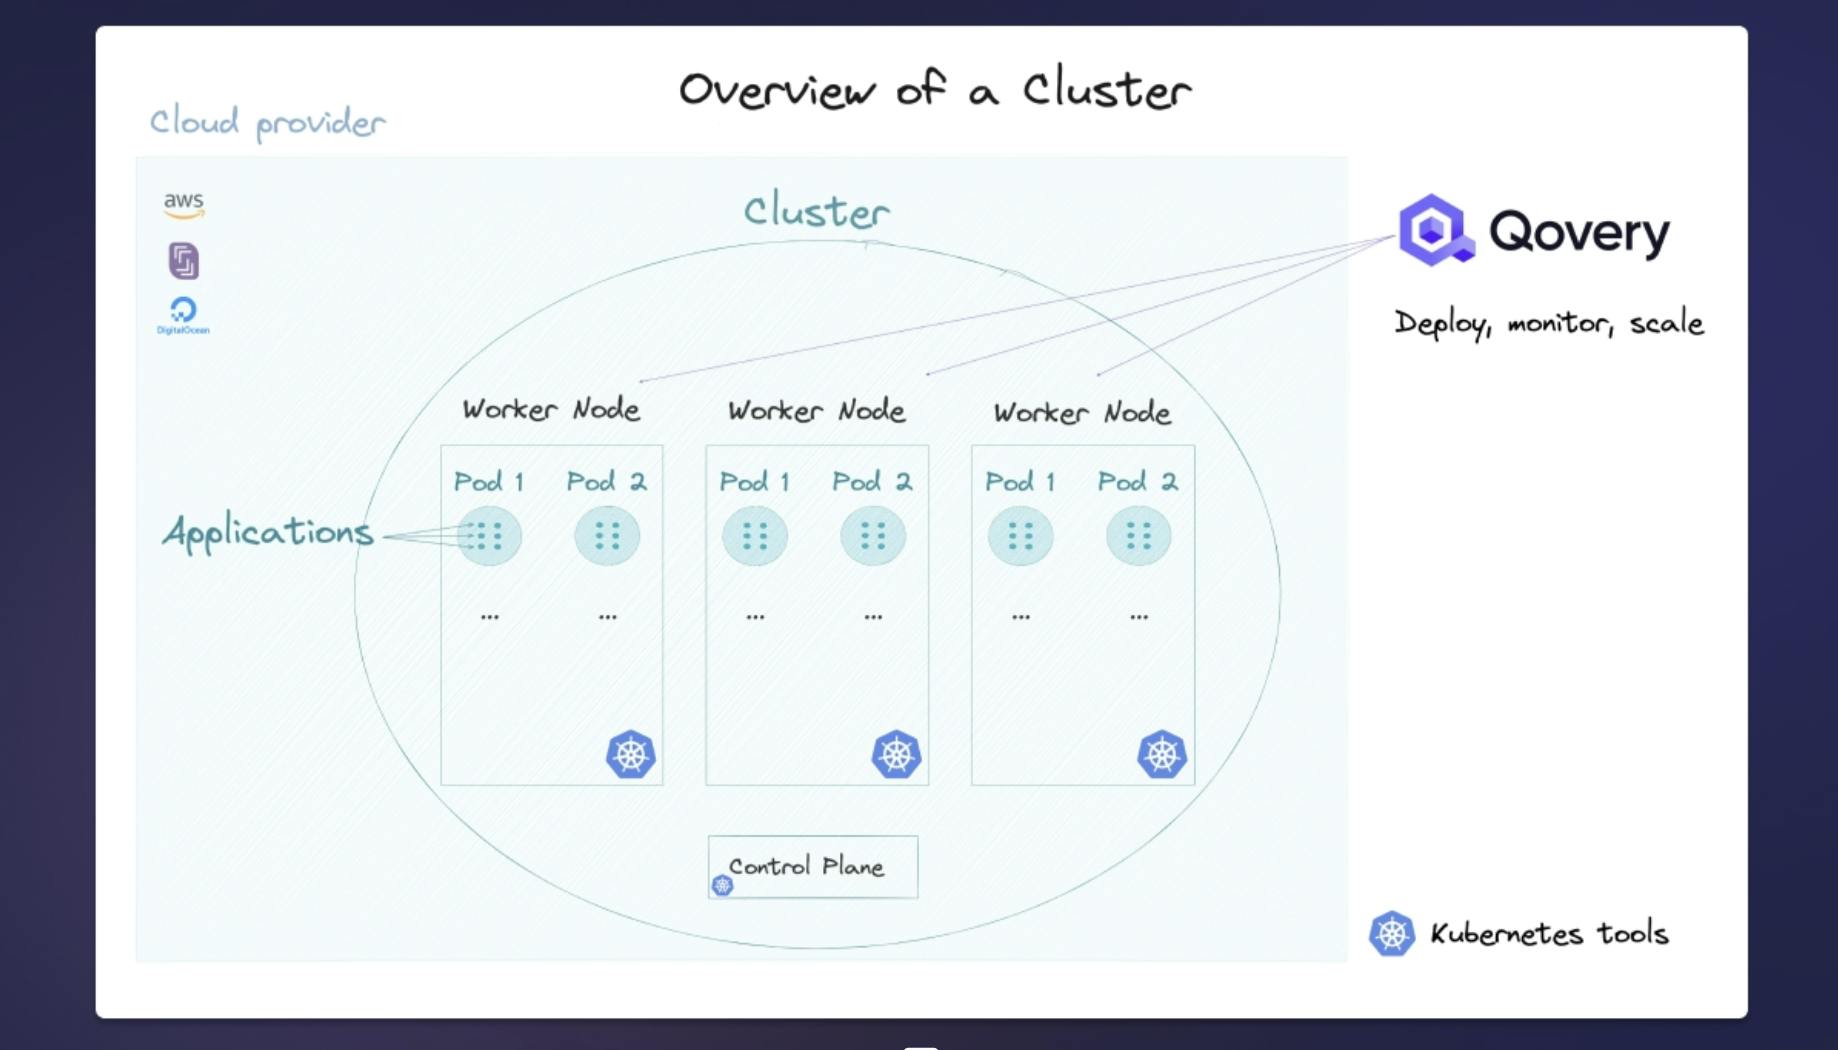 Overview of a Cluster